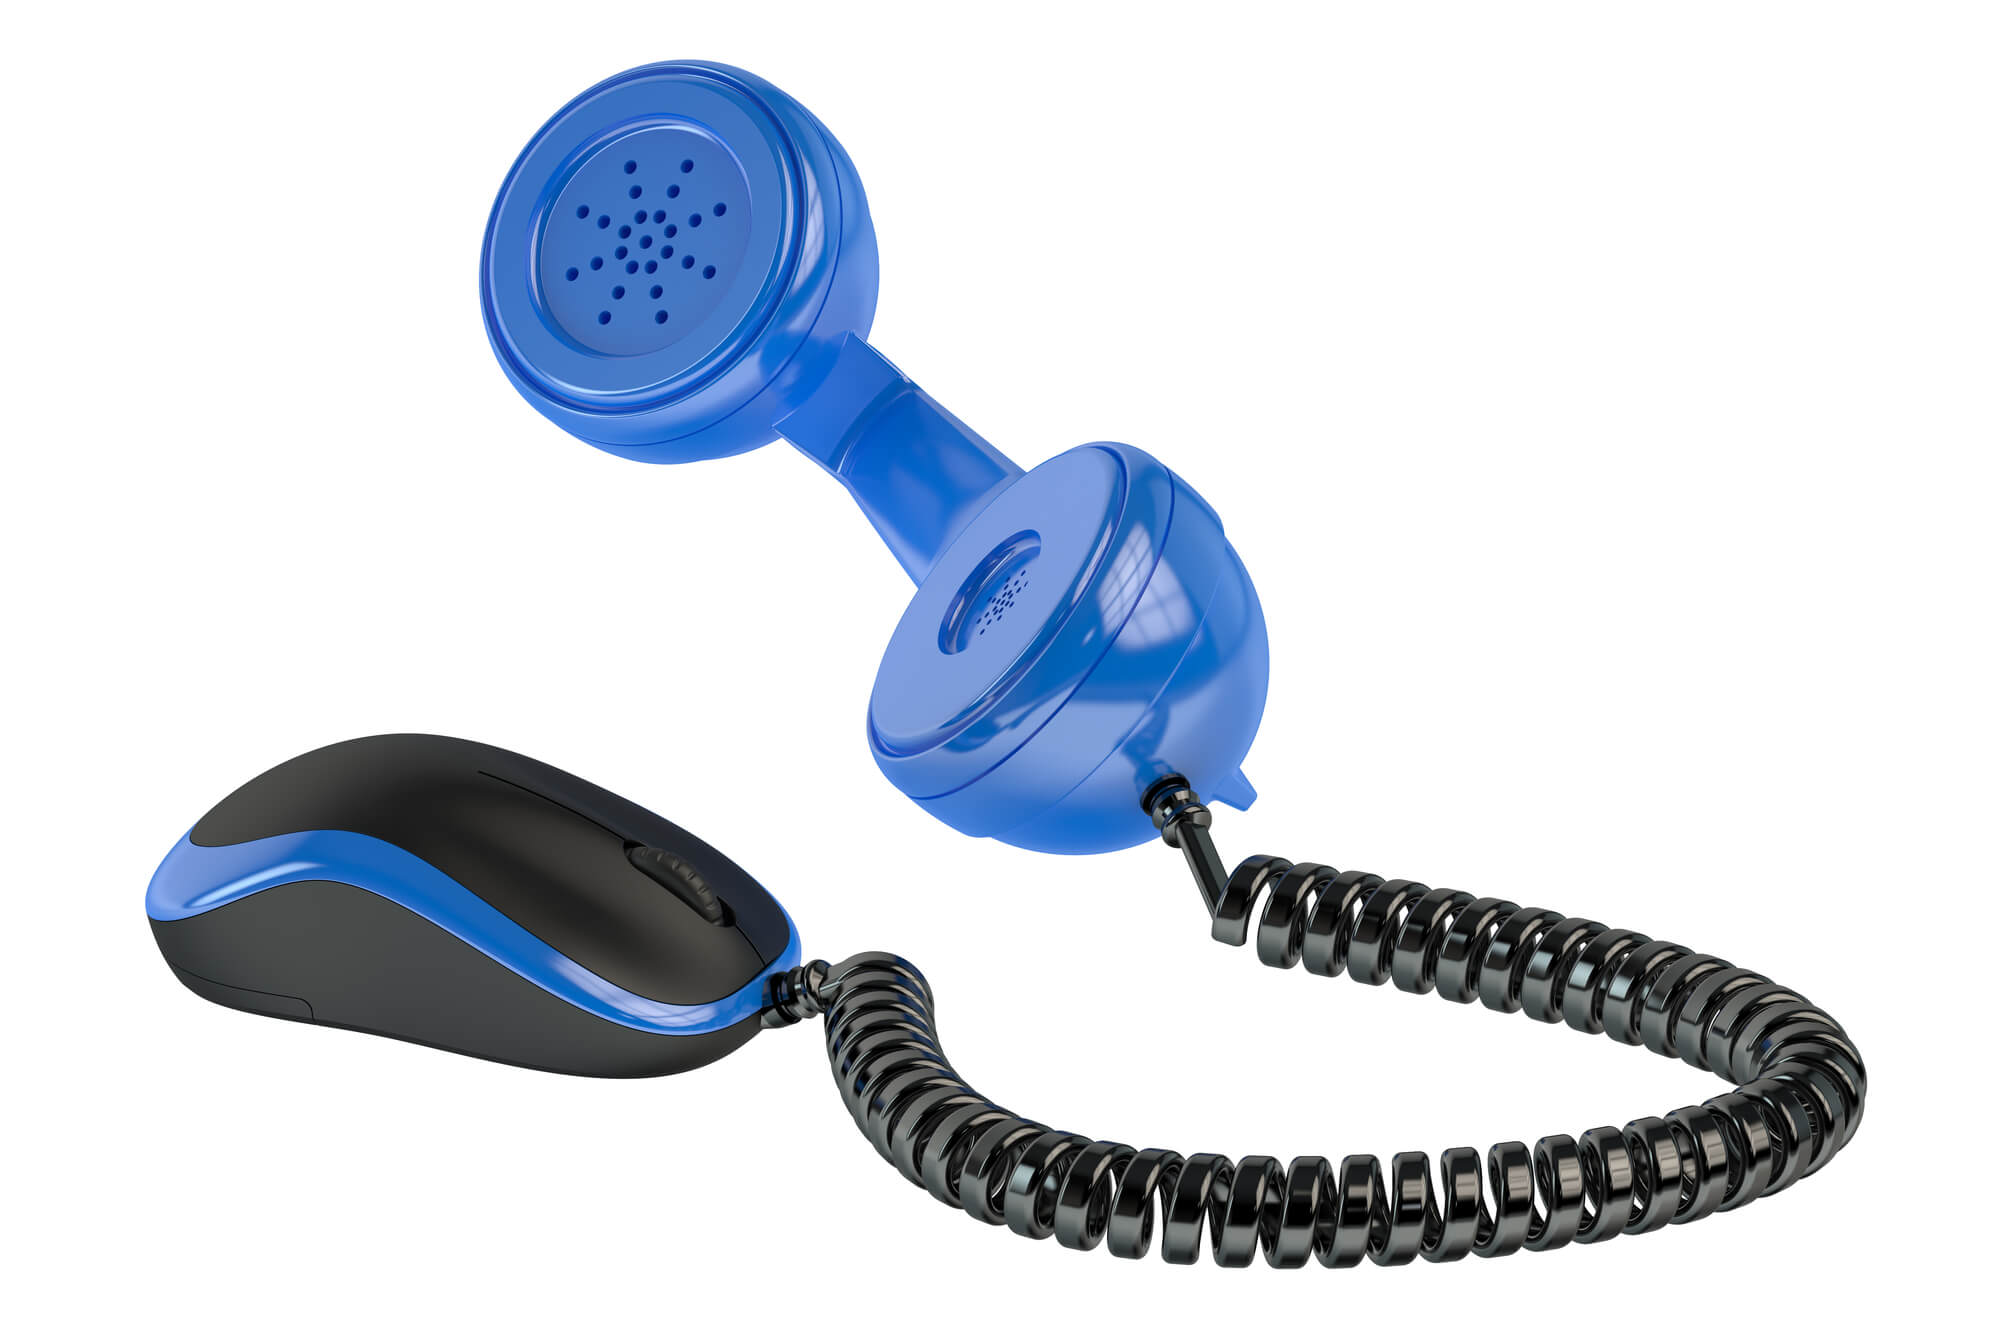 VoIP technology represented by a phone cord connected to a mouse